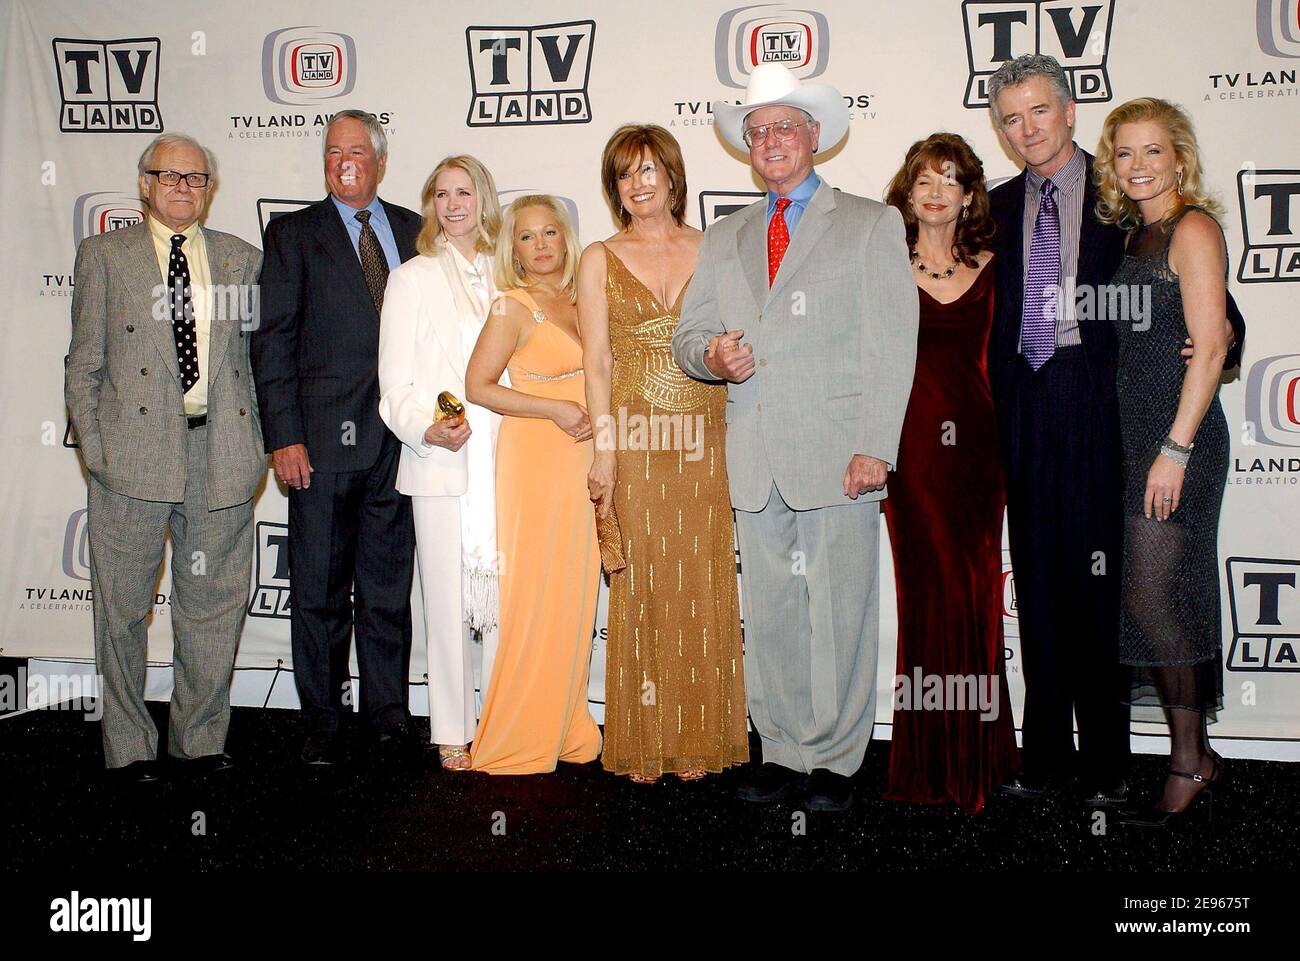 'Dallas' Larry Hagman, Patrick Duffy, Susan Howard, Charlene Tilton, Linda Gray, Mary Crosby and Sheree J. Wilson pose in the press room at the 2006 TV Land Awards held at the Barker Hangar in Santa Monica, CA, USA on March 19, 2006. Photo by Lionel Hahn/ABACAPRESS.COM Stock Photo